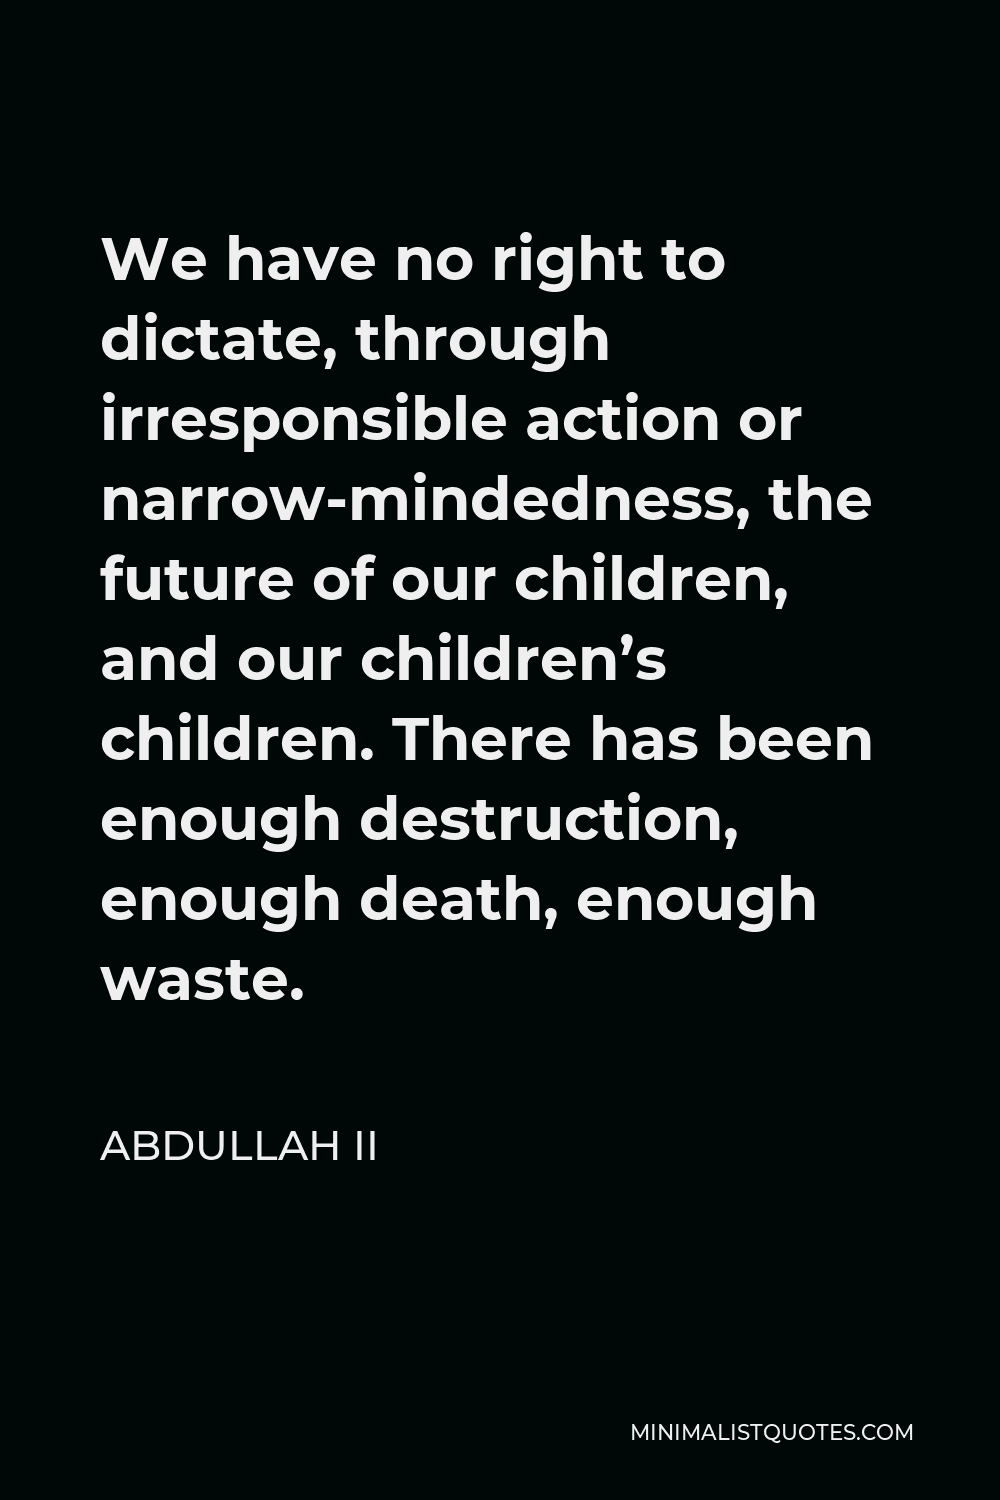 Abdullah II Quote - We have no right to dictate, through irresponsible action or narrow-mindedness, the future of our children, and our children’s children. There has been enough destruction, enough death, enough waste.